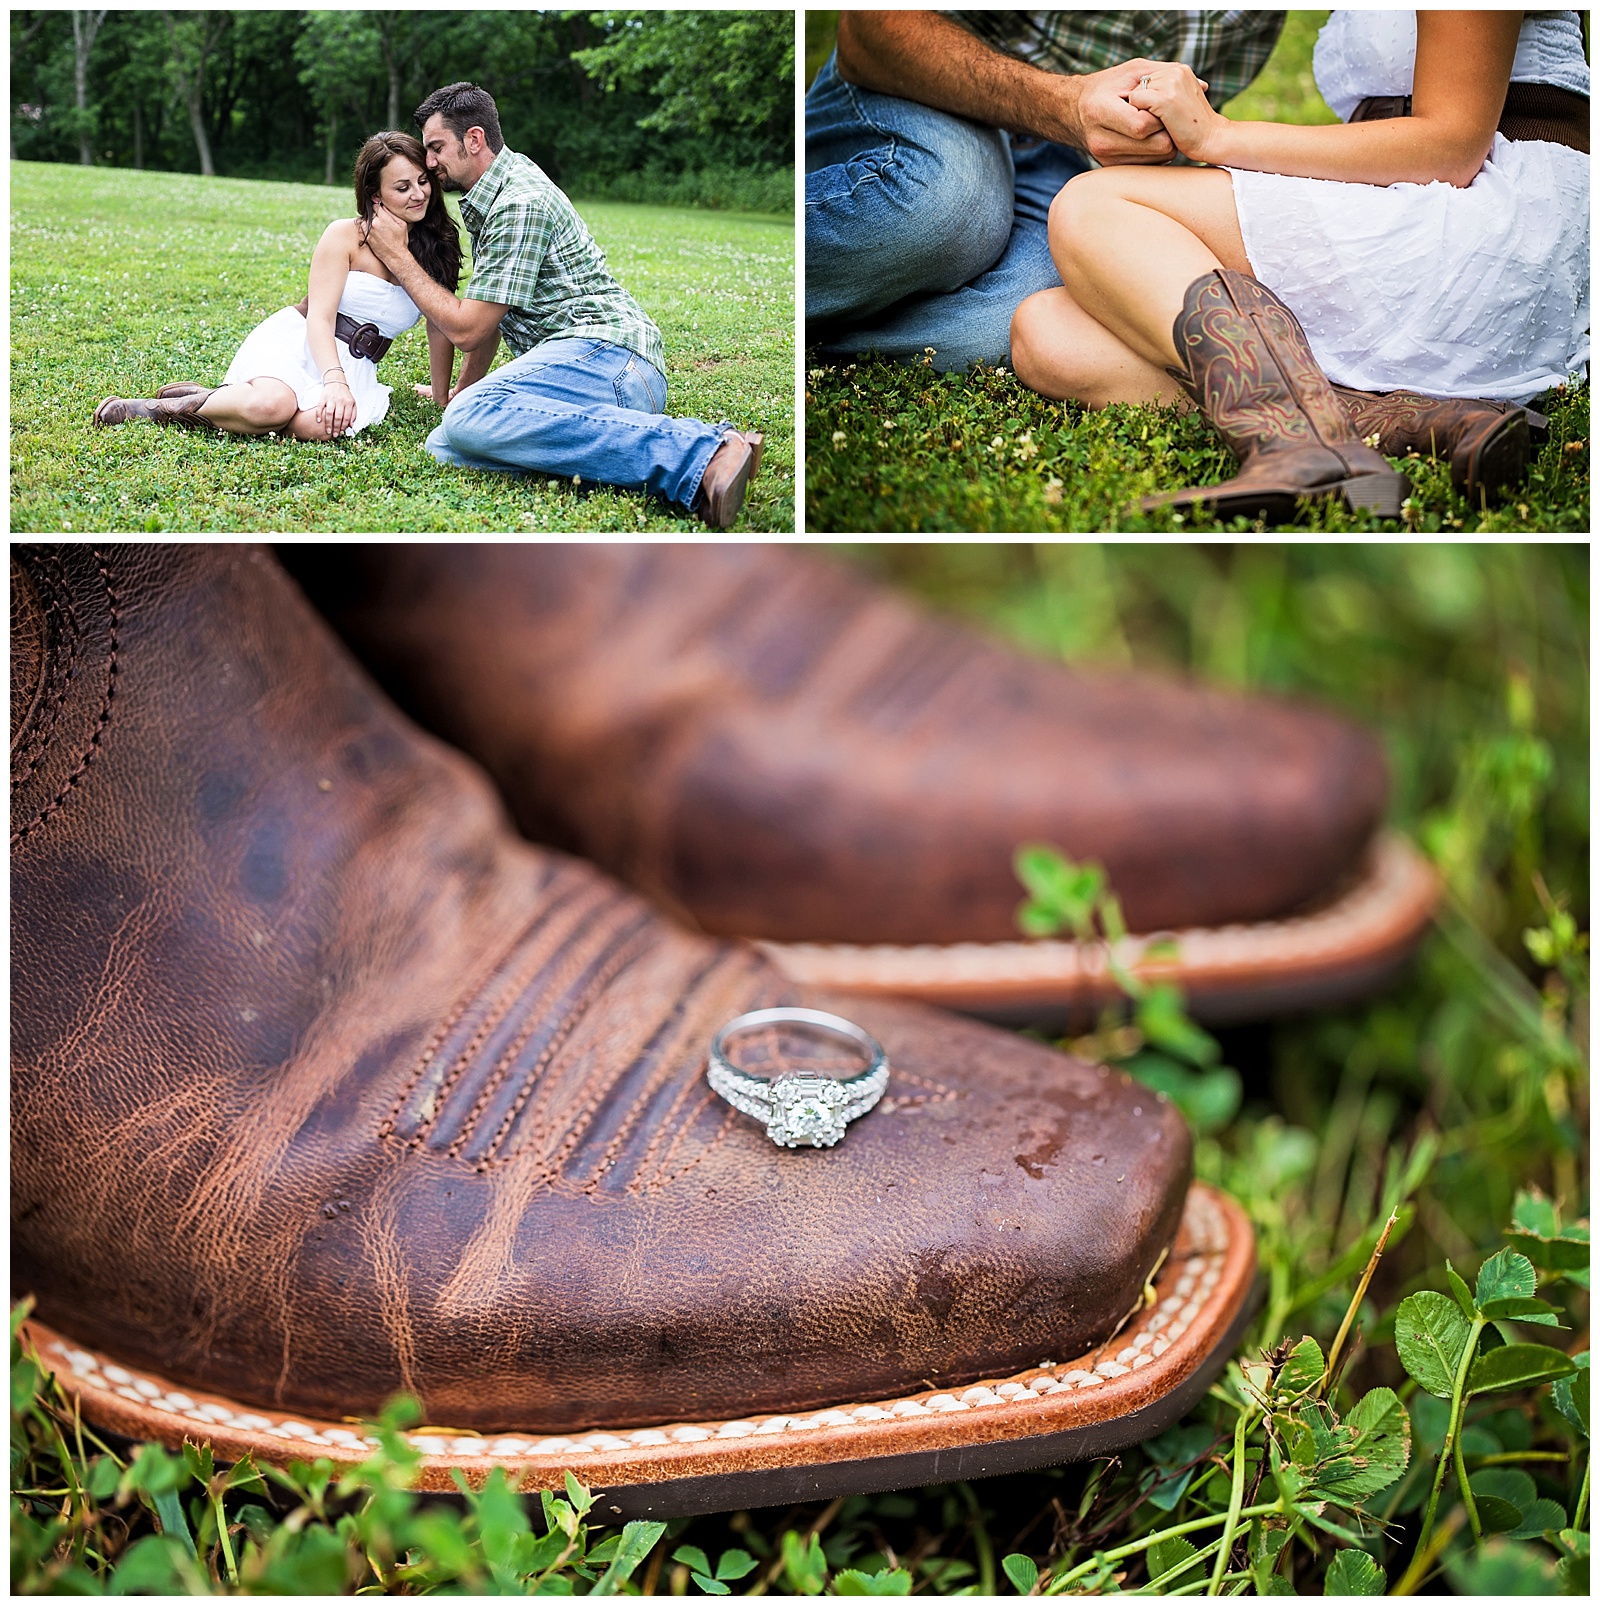 An engagement session at Unity Village in Lee's Summit, Missouri.